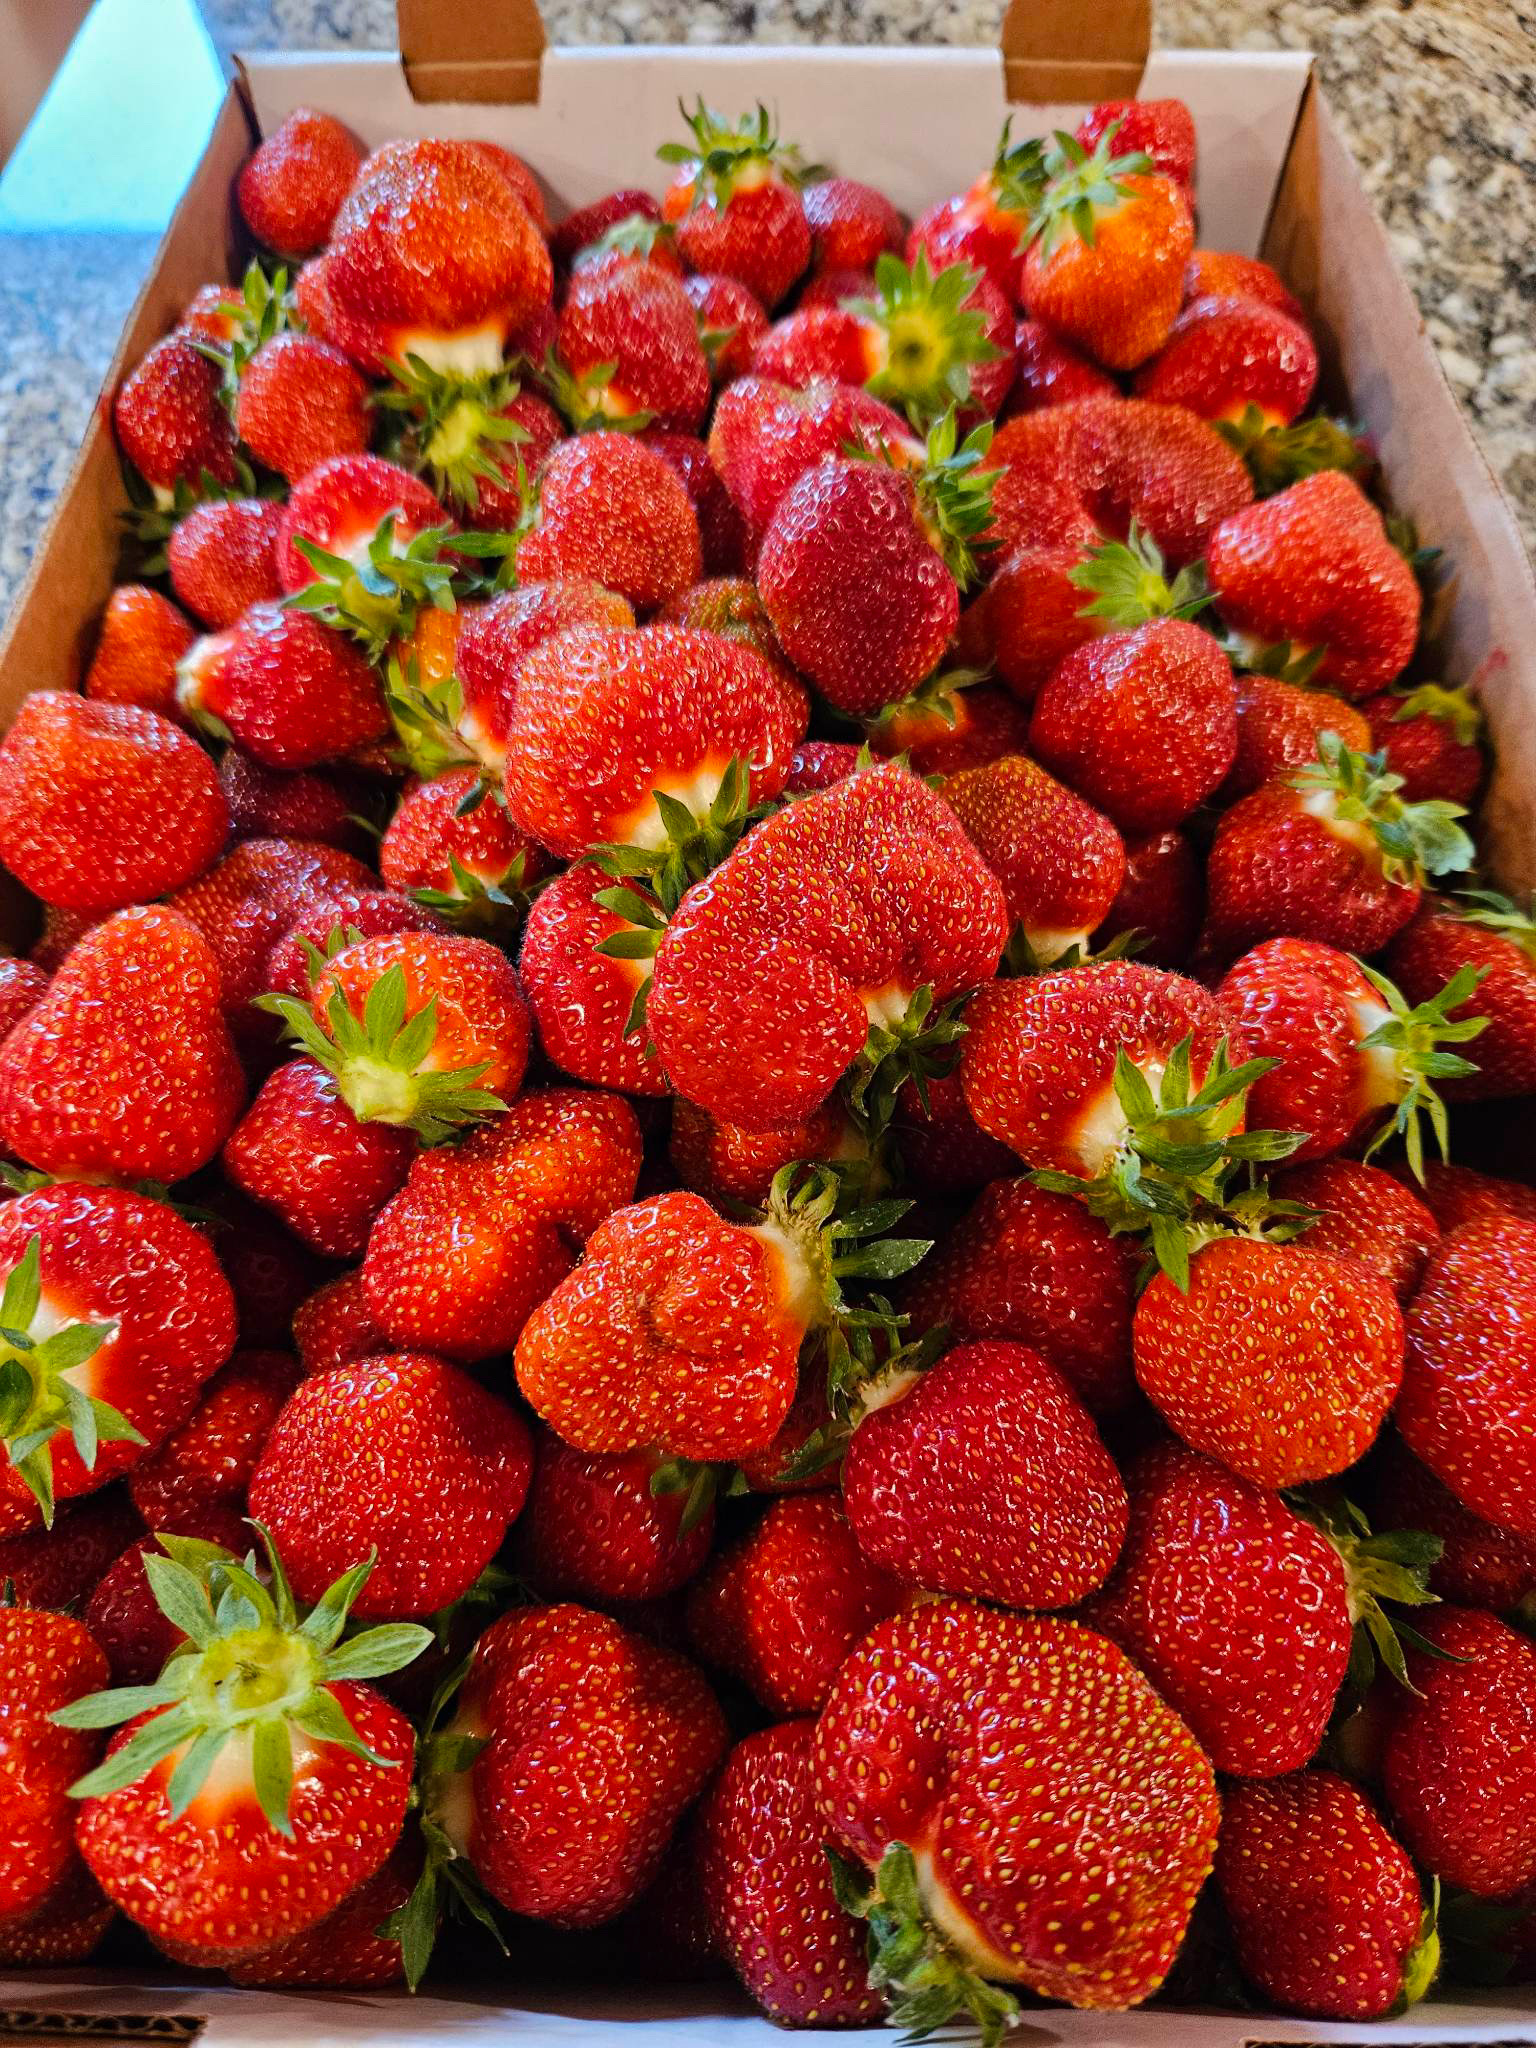 Tips for a good day at the strawberry patch! 🍓